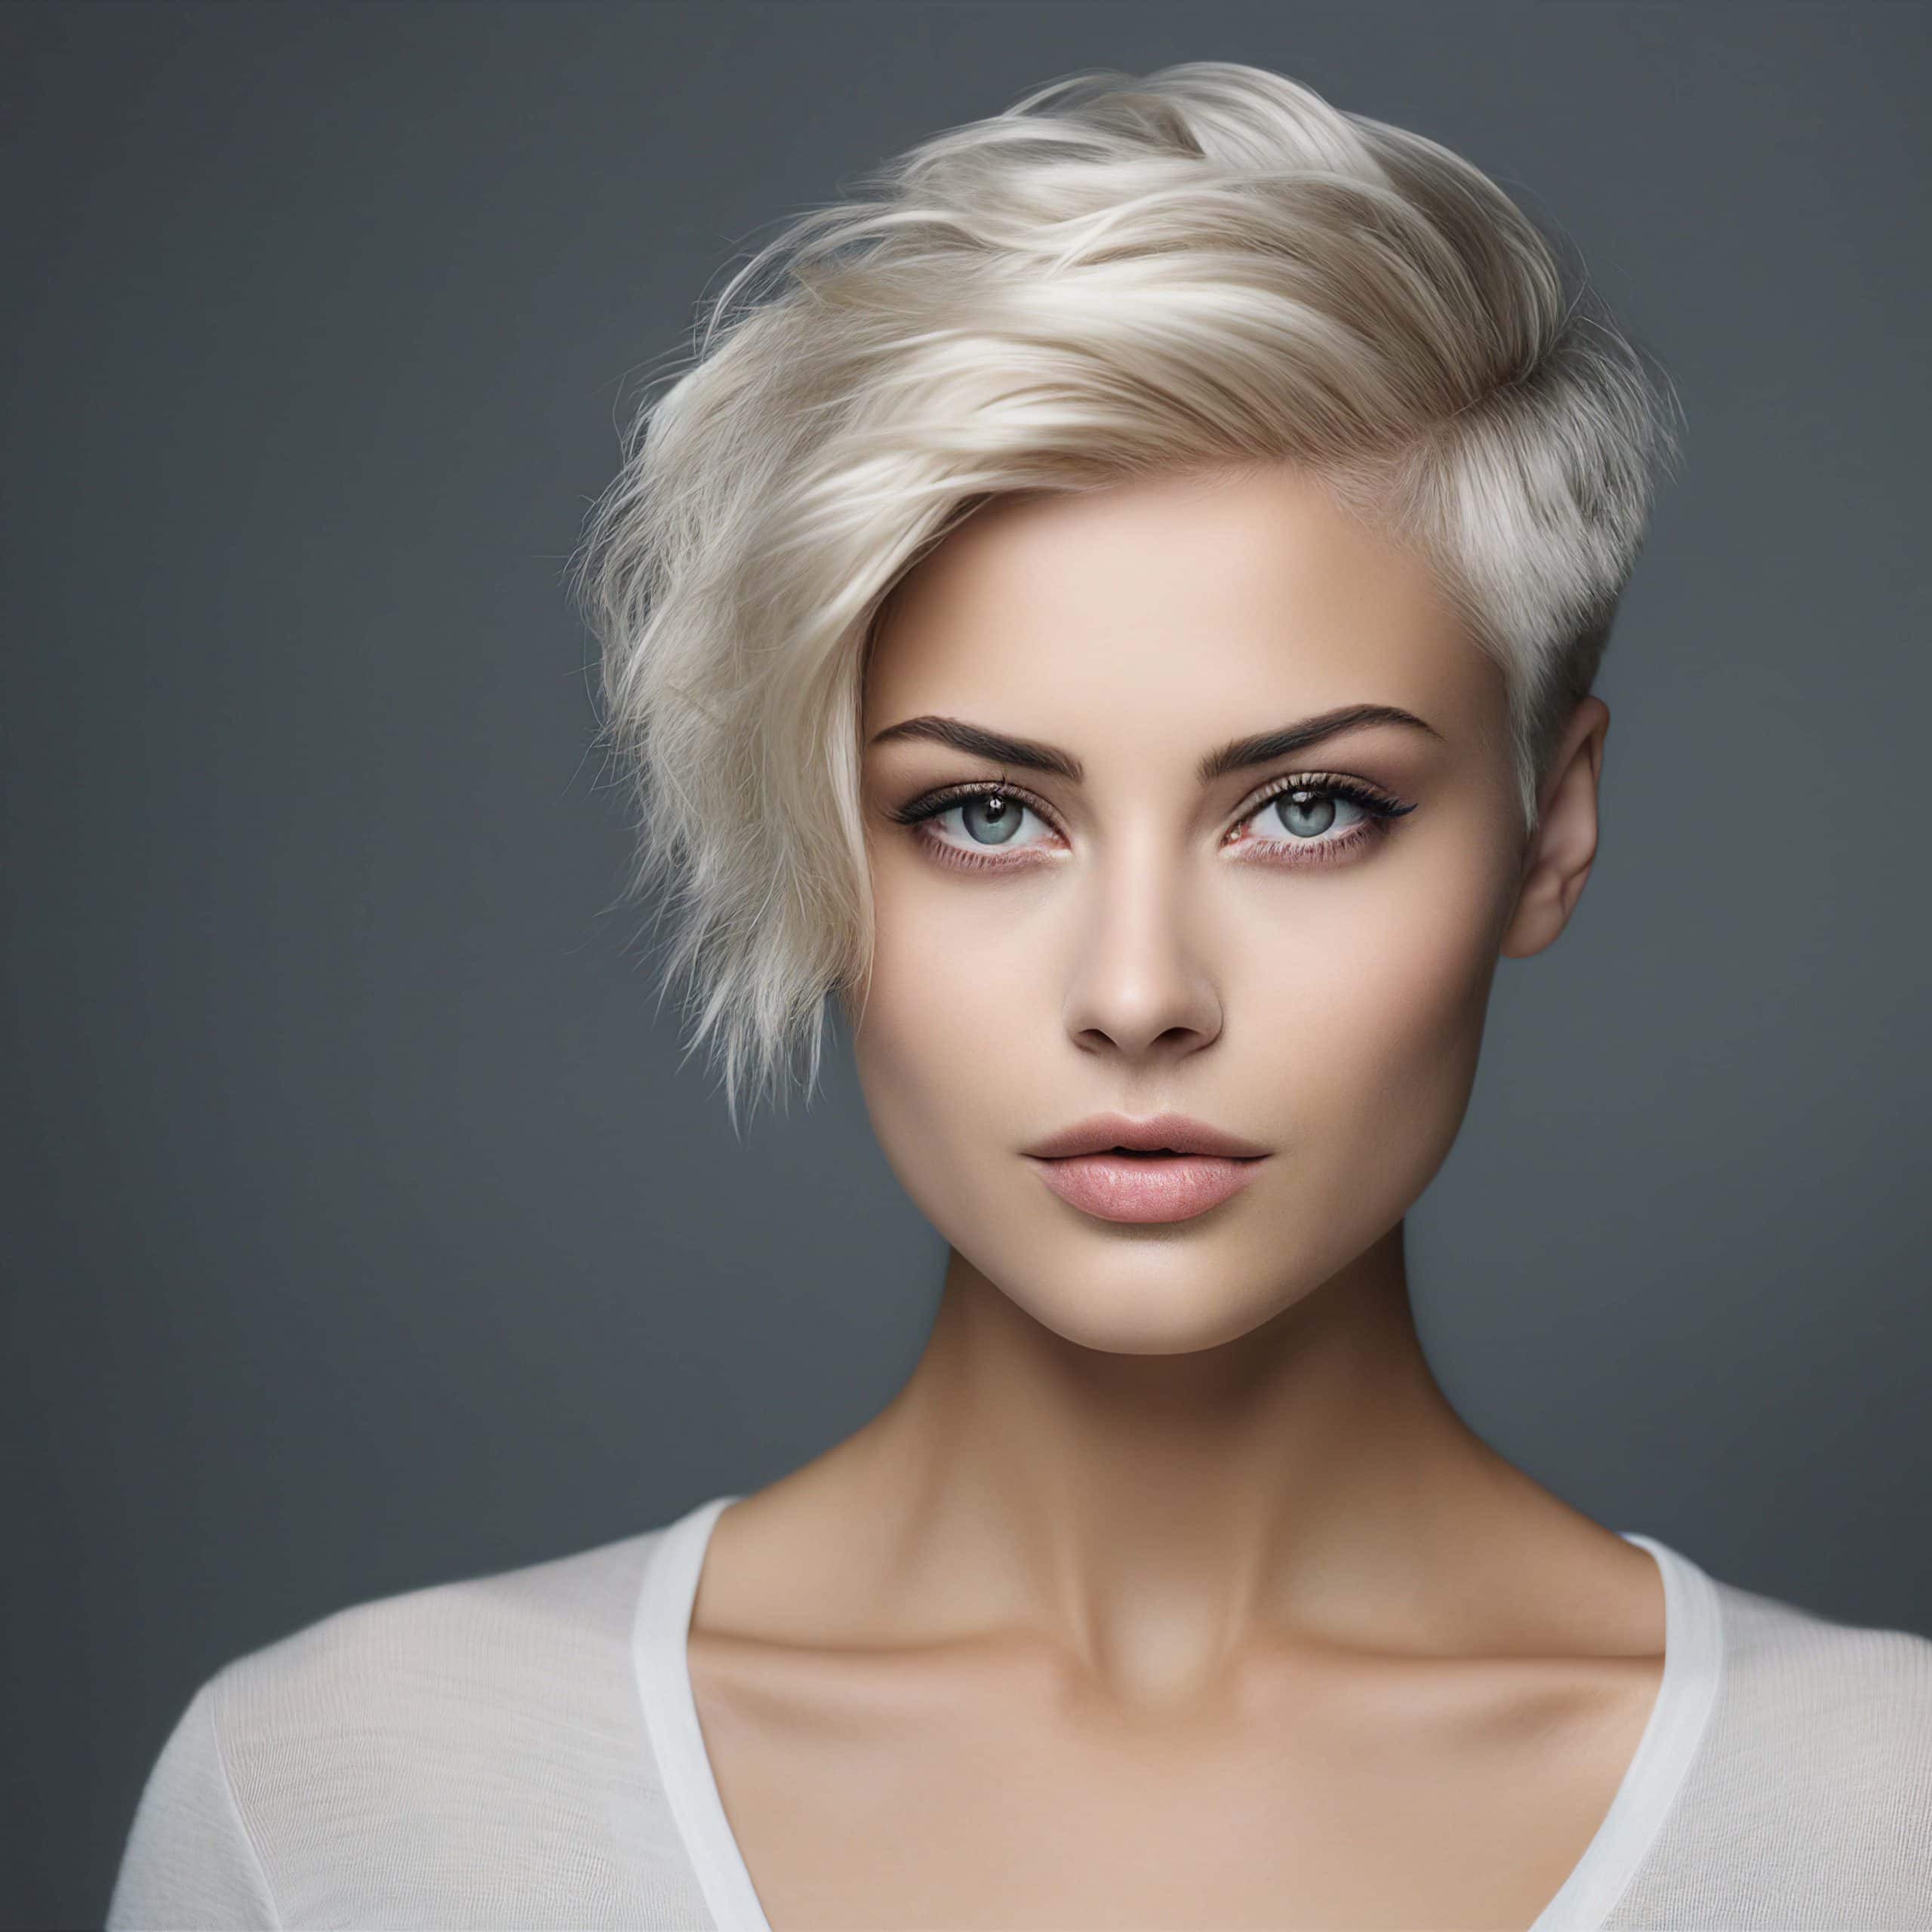 capelli-corti-donna-blonde-pixie-hairlovers-style.jpg